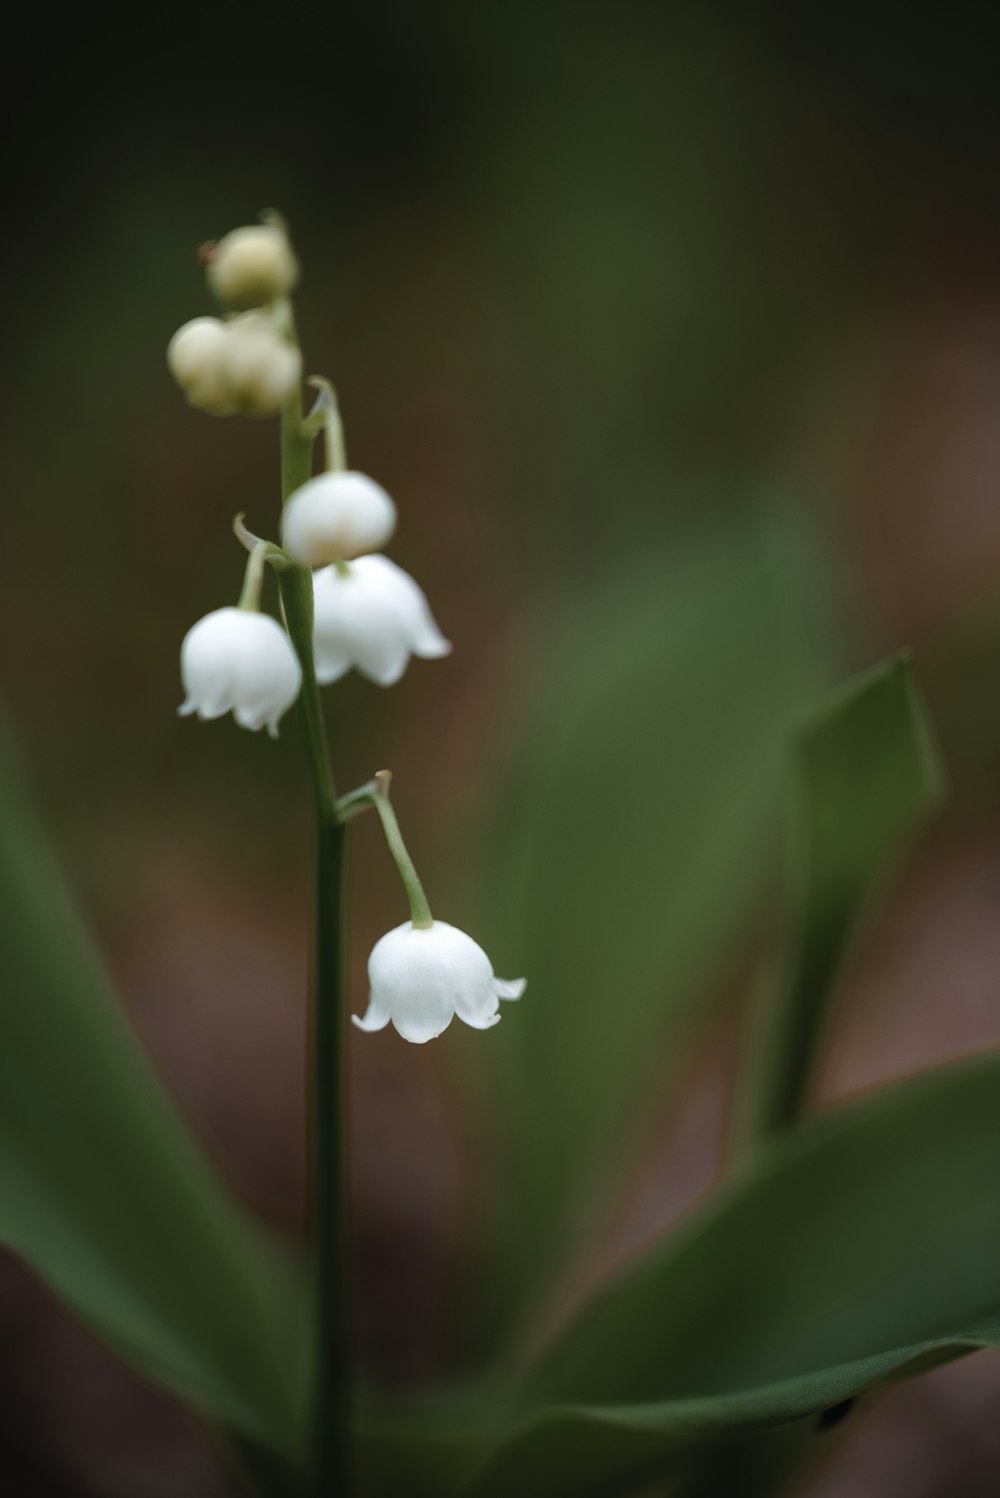 a close up of a plant with white flowers